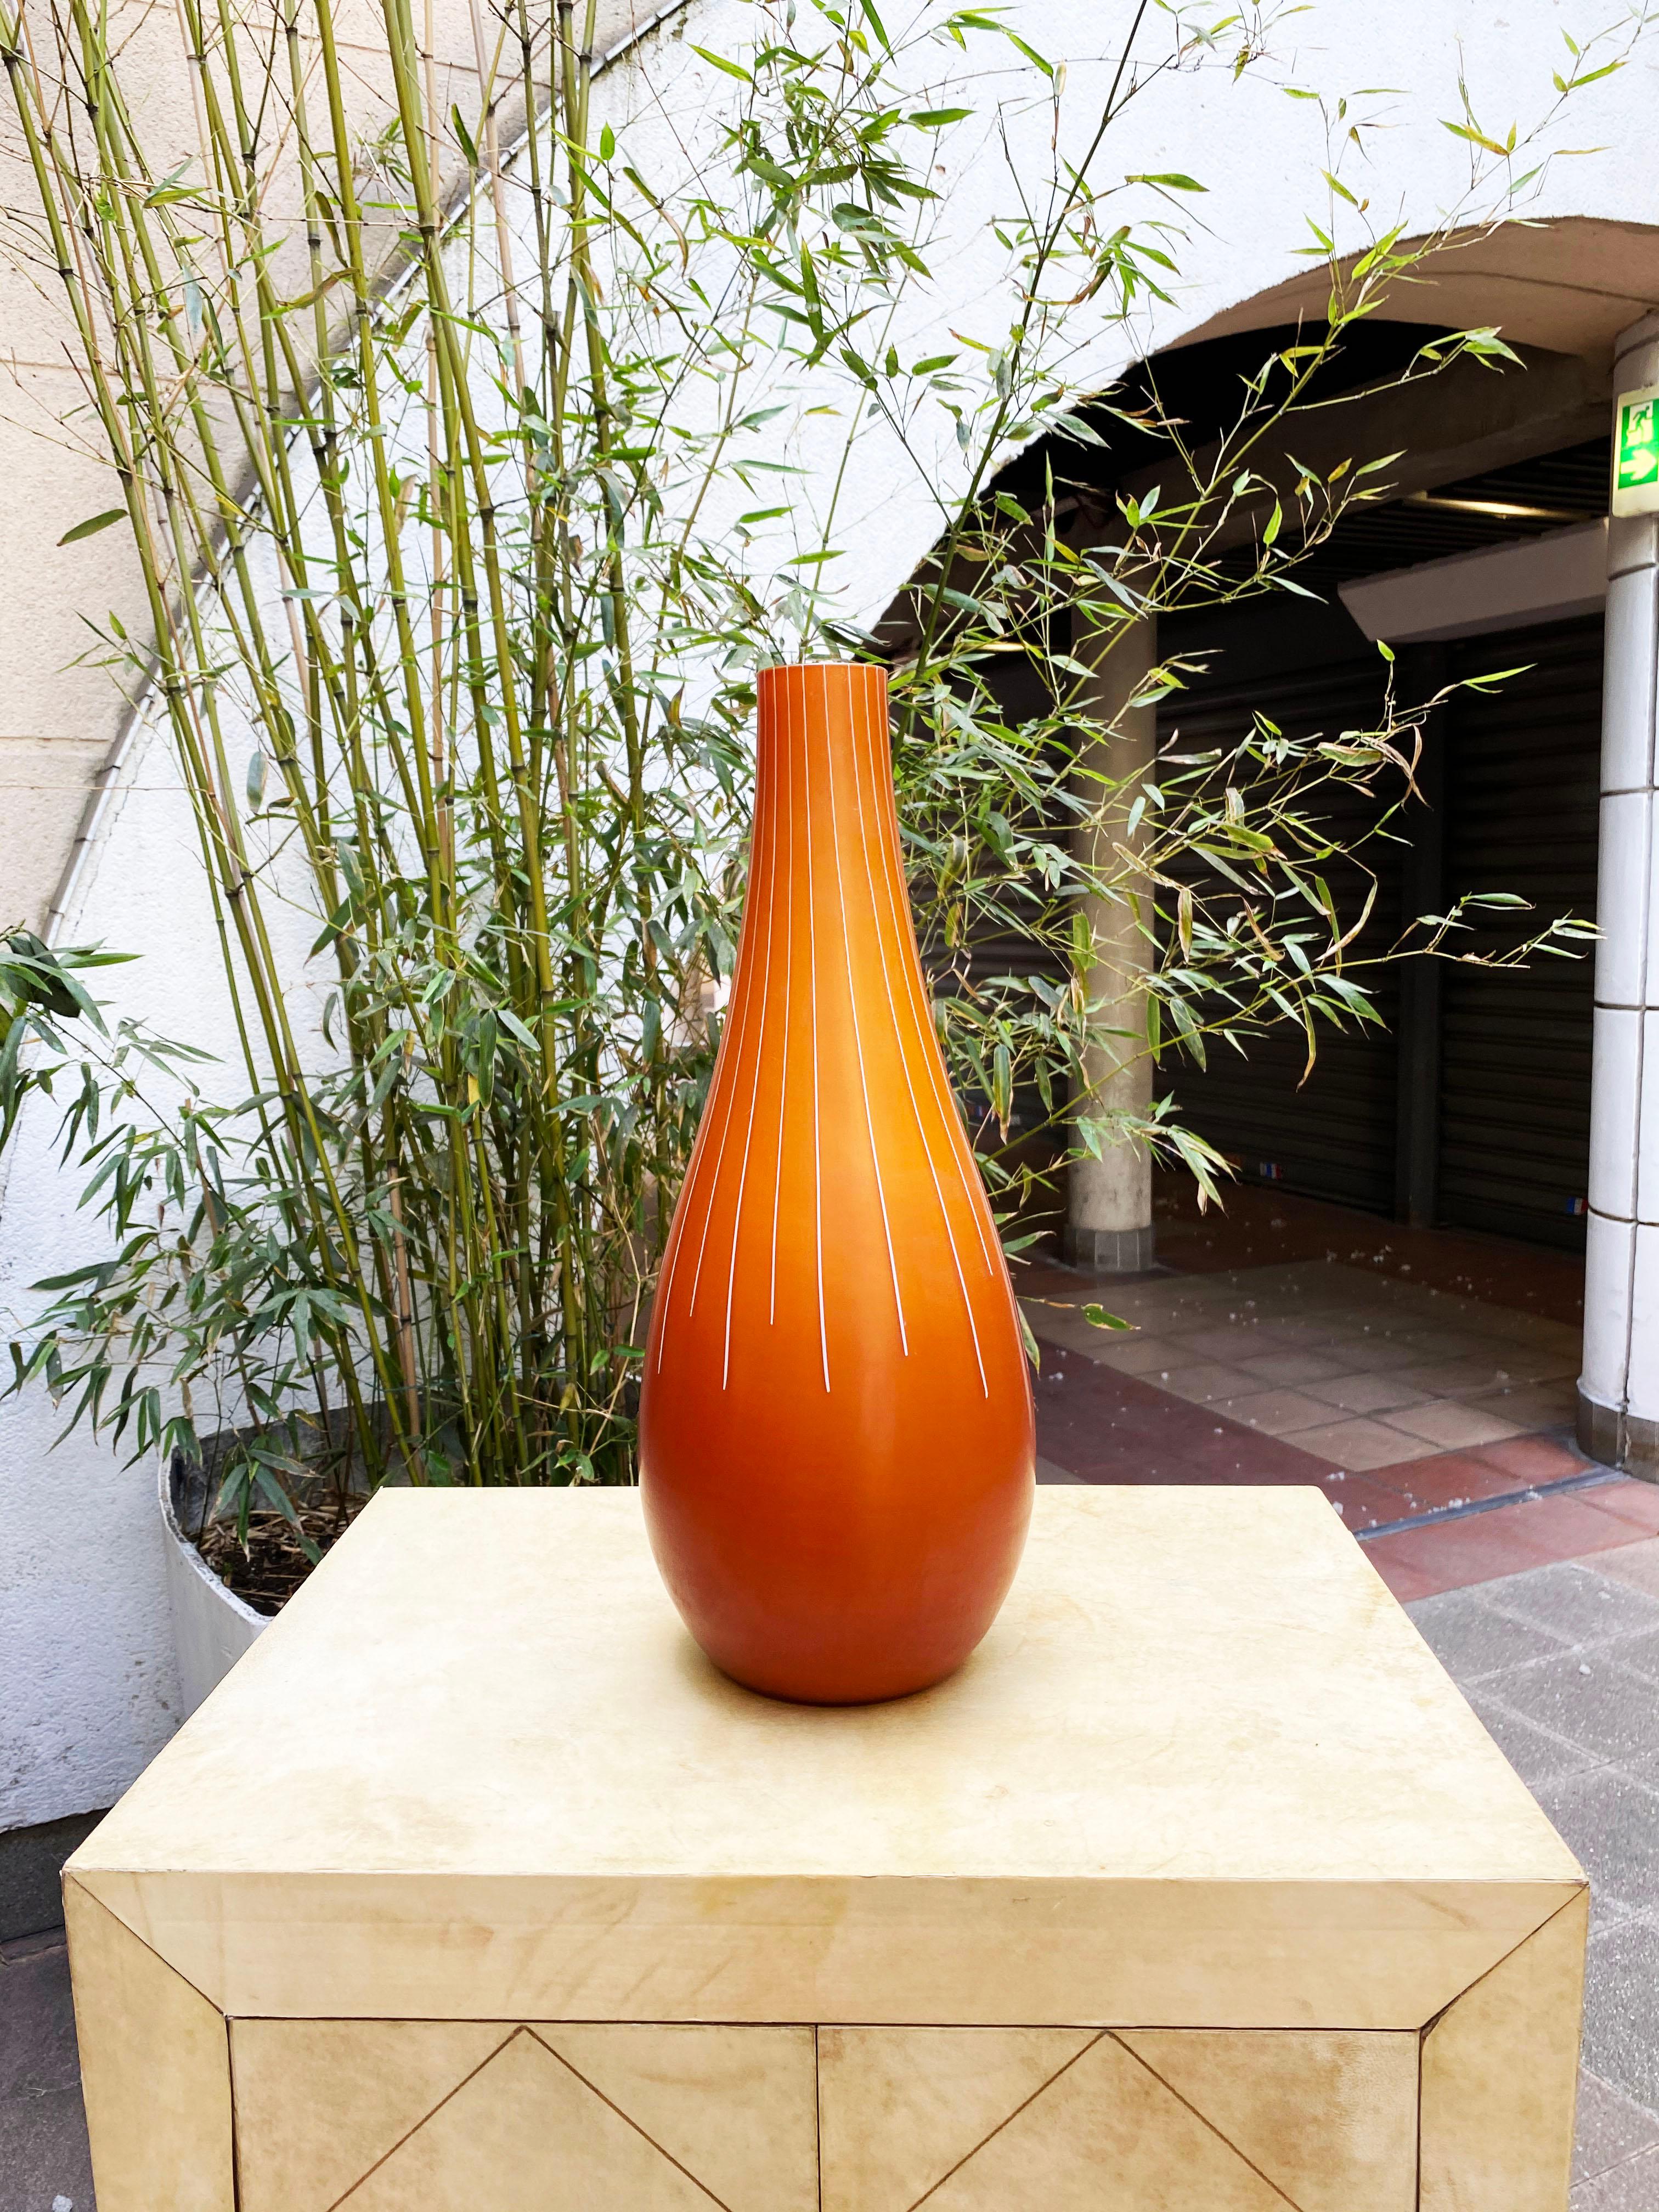 Salviati Murano
by Francesco Lucchese
Algoritmi model
Amber tinted vase with white and red rays decoration
red interior
dated 2005 and signed by the artist
new in stock in its original box
Size: 45 H x 25 L
1200 Euros

Salviati.
Glass,